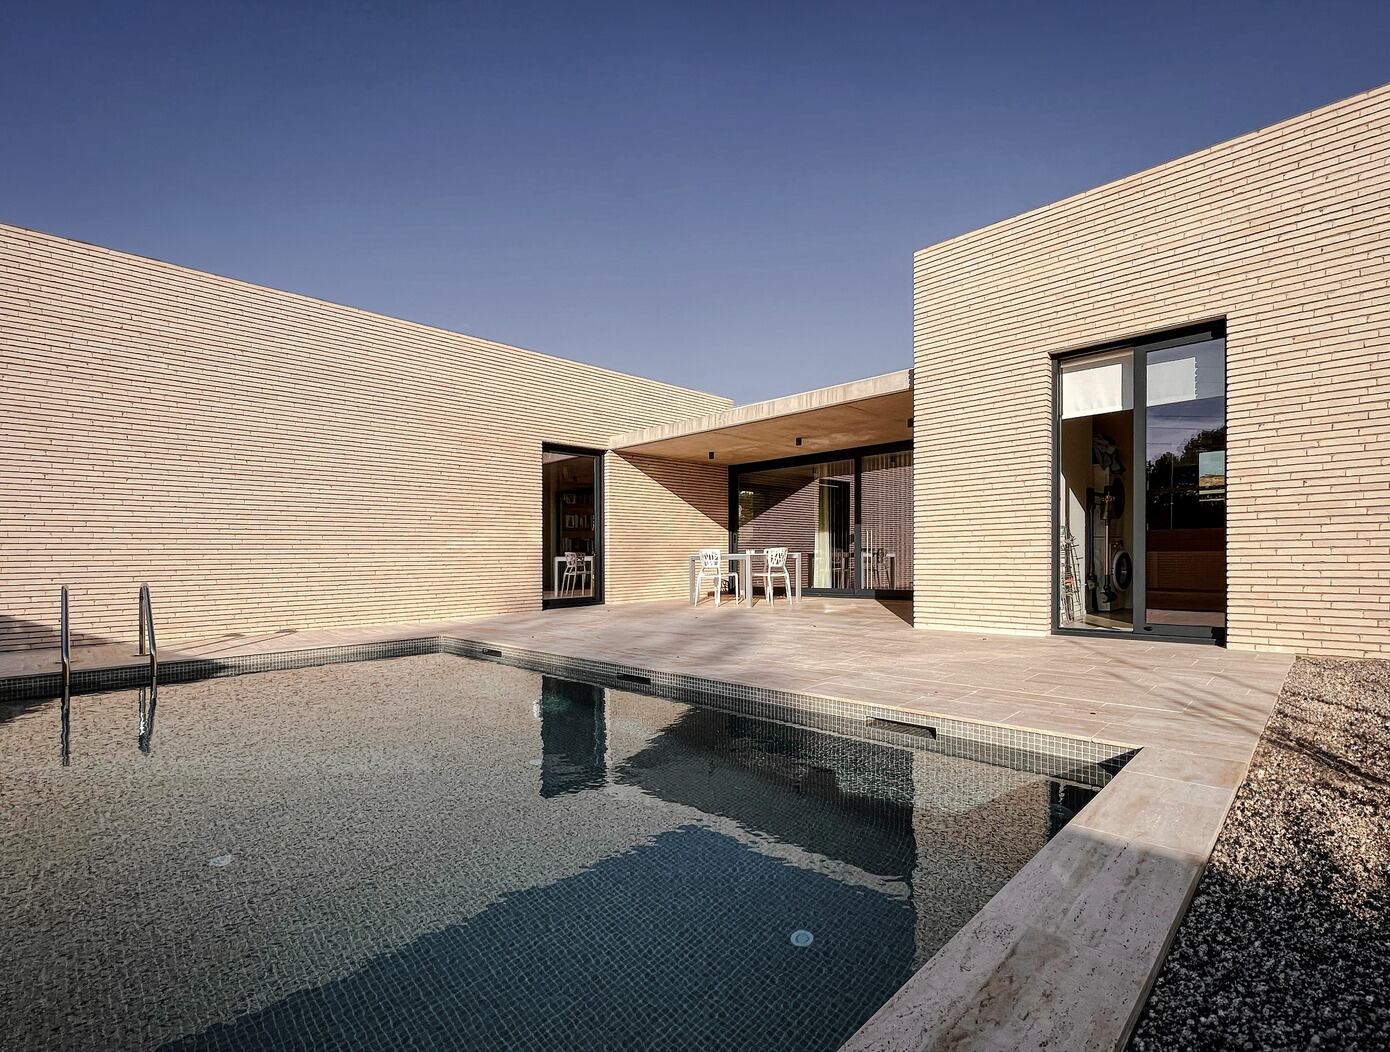 Casa l’Abril: A Harmonious Blend of Privacy and Openness